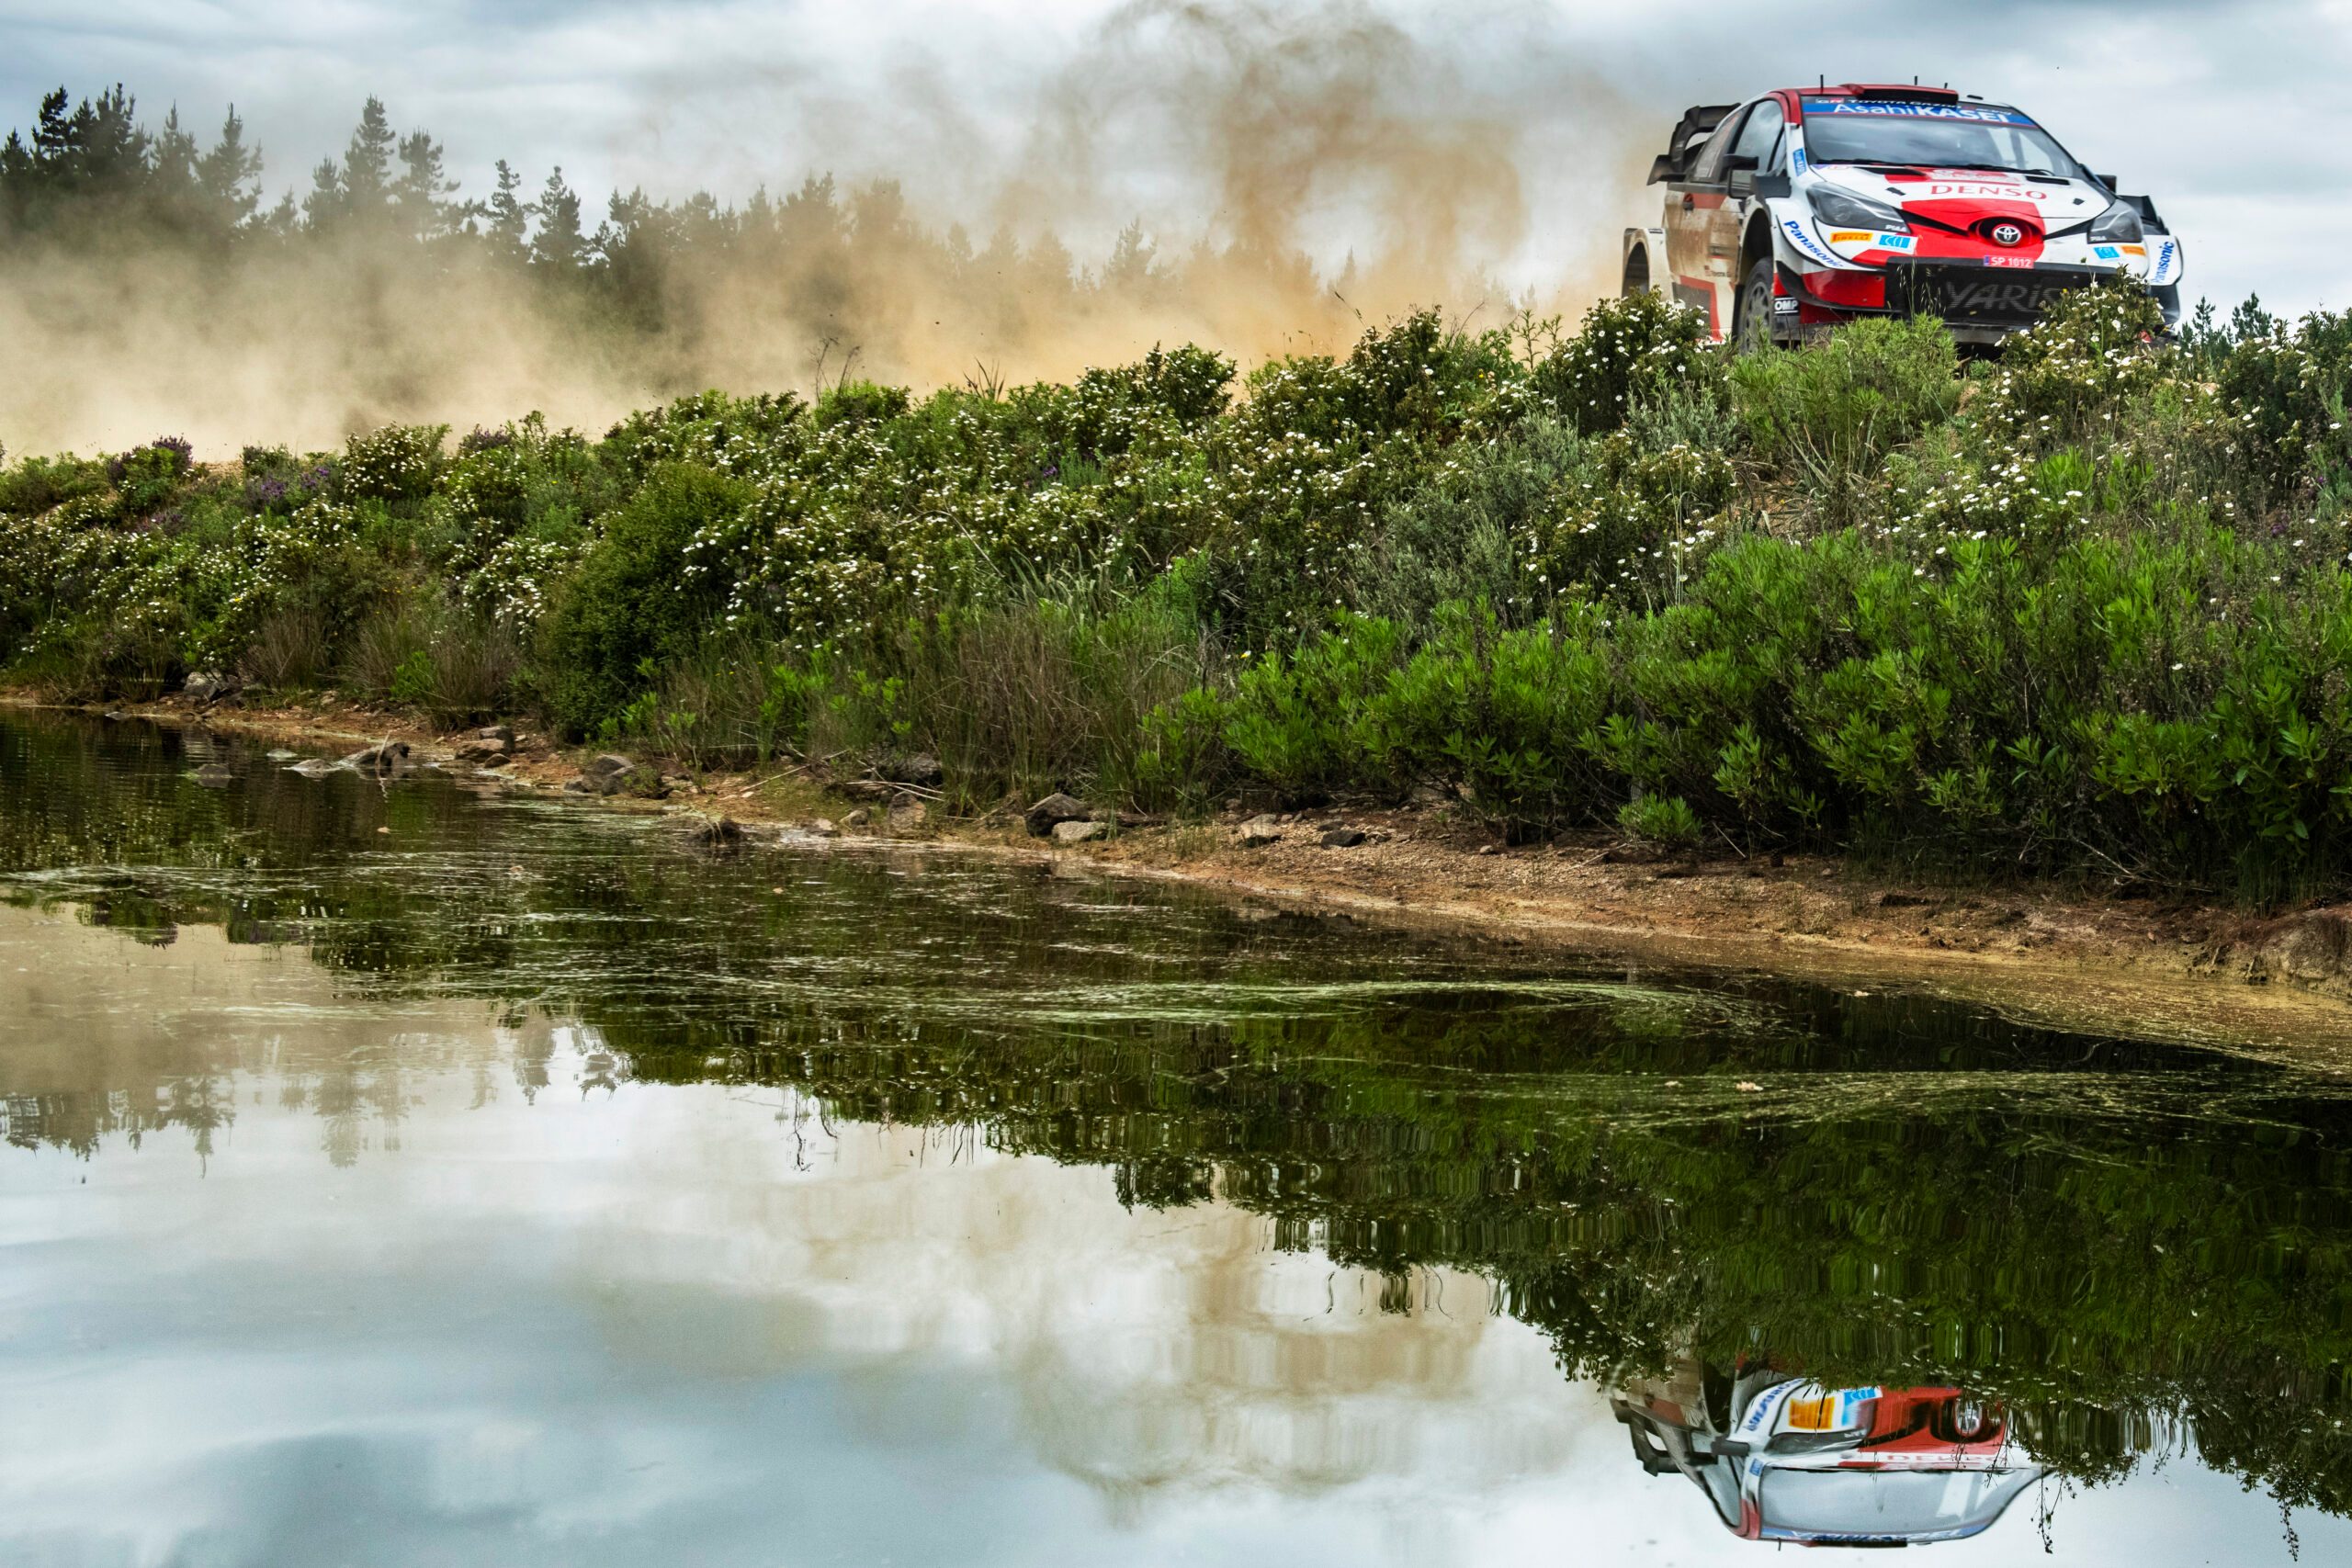 Sebastien Ogier (FRA) and Julien Ingrassia (FRA) of team Toyota Gazoo Racing are performing during World Rally Championship Sardinia in Olbia, Italy on June 4, 2021.